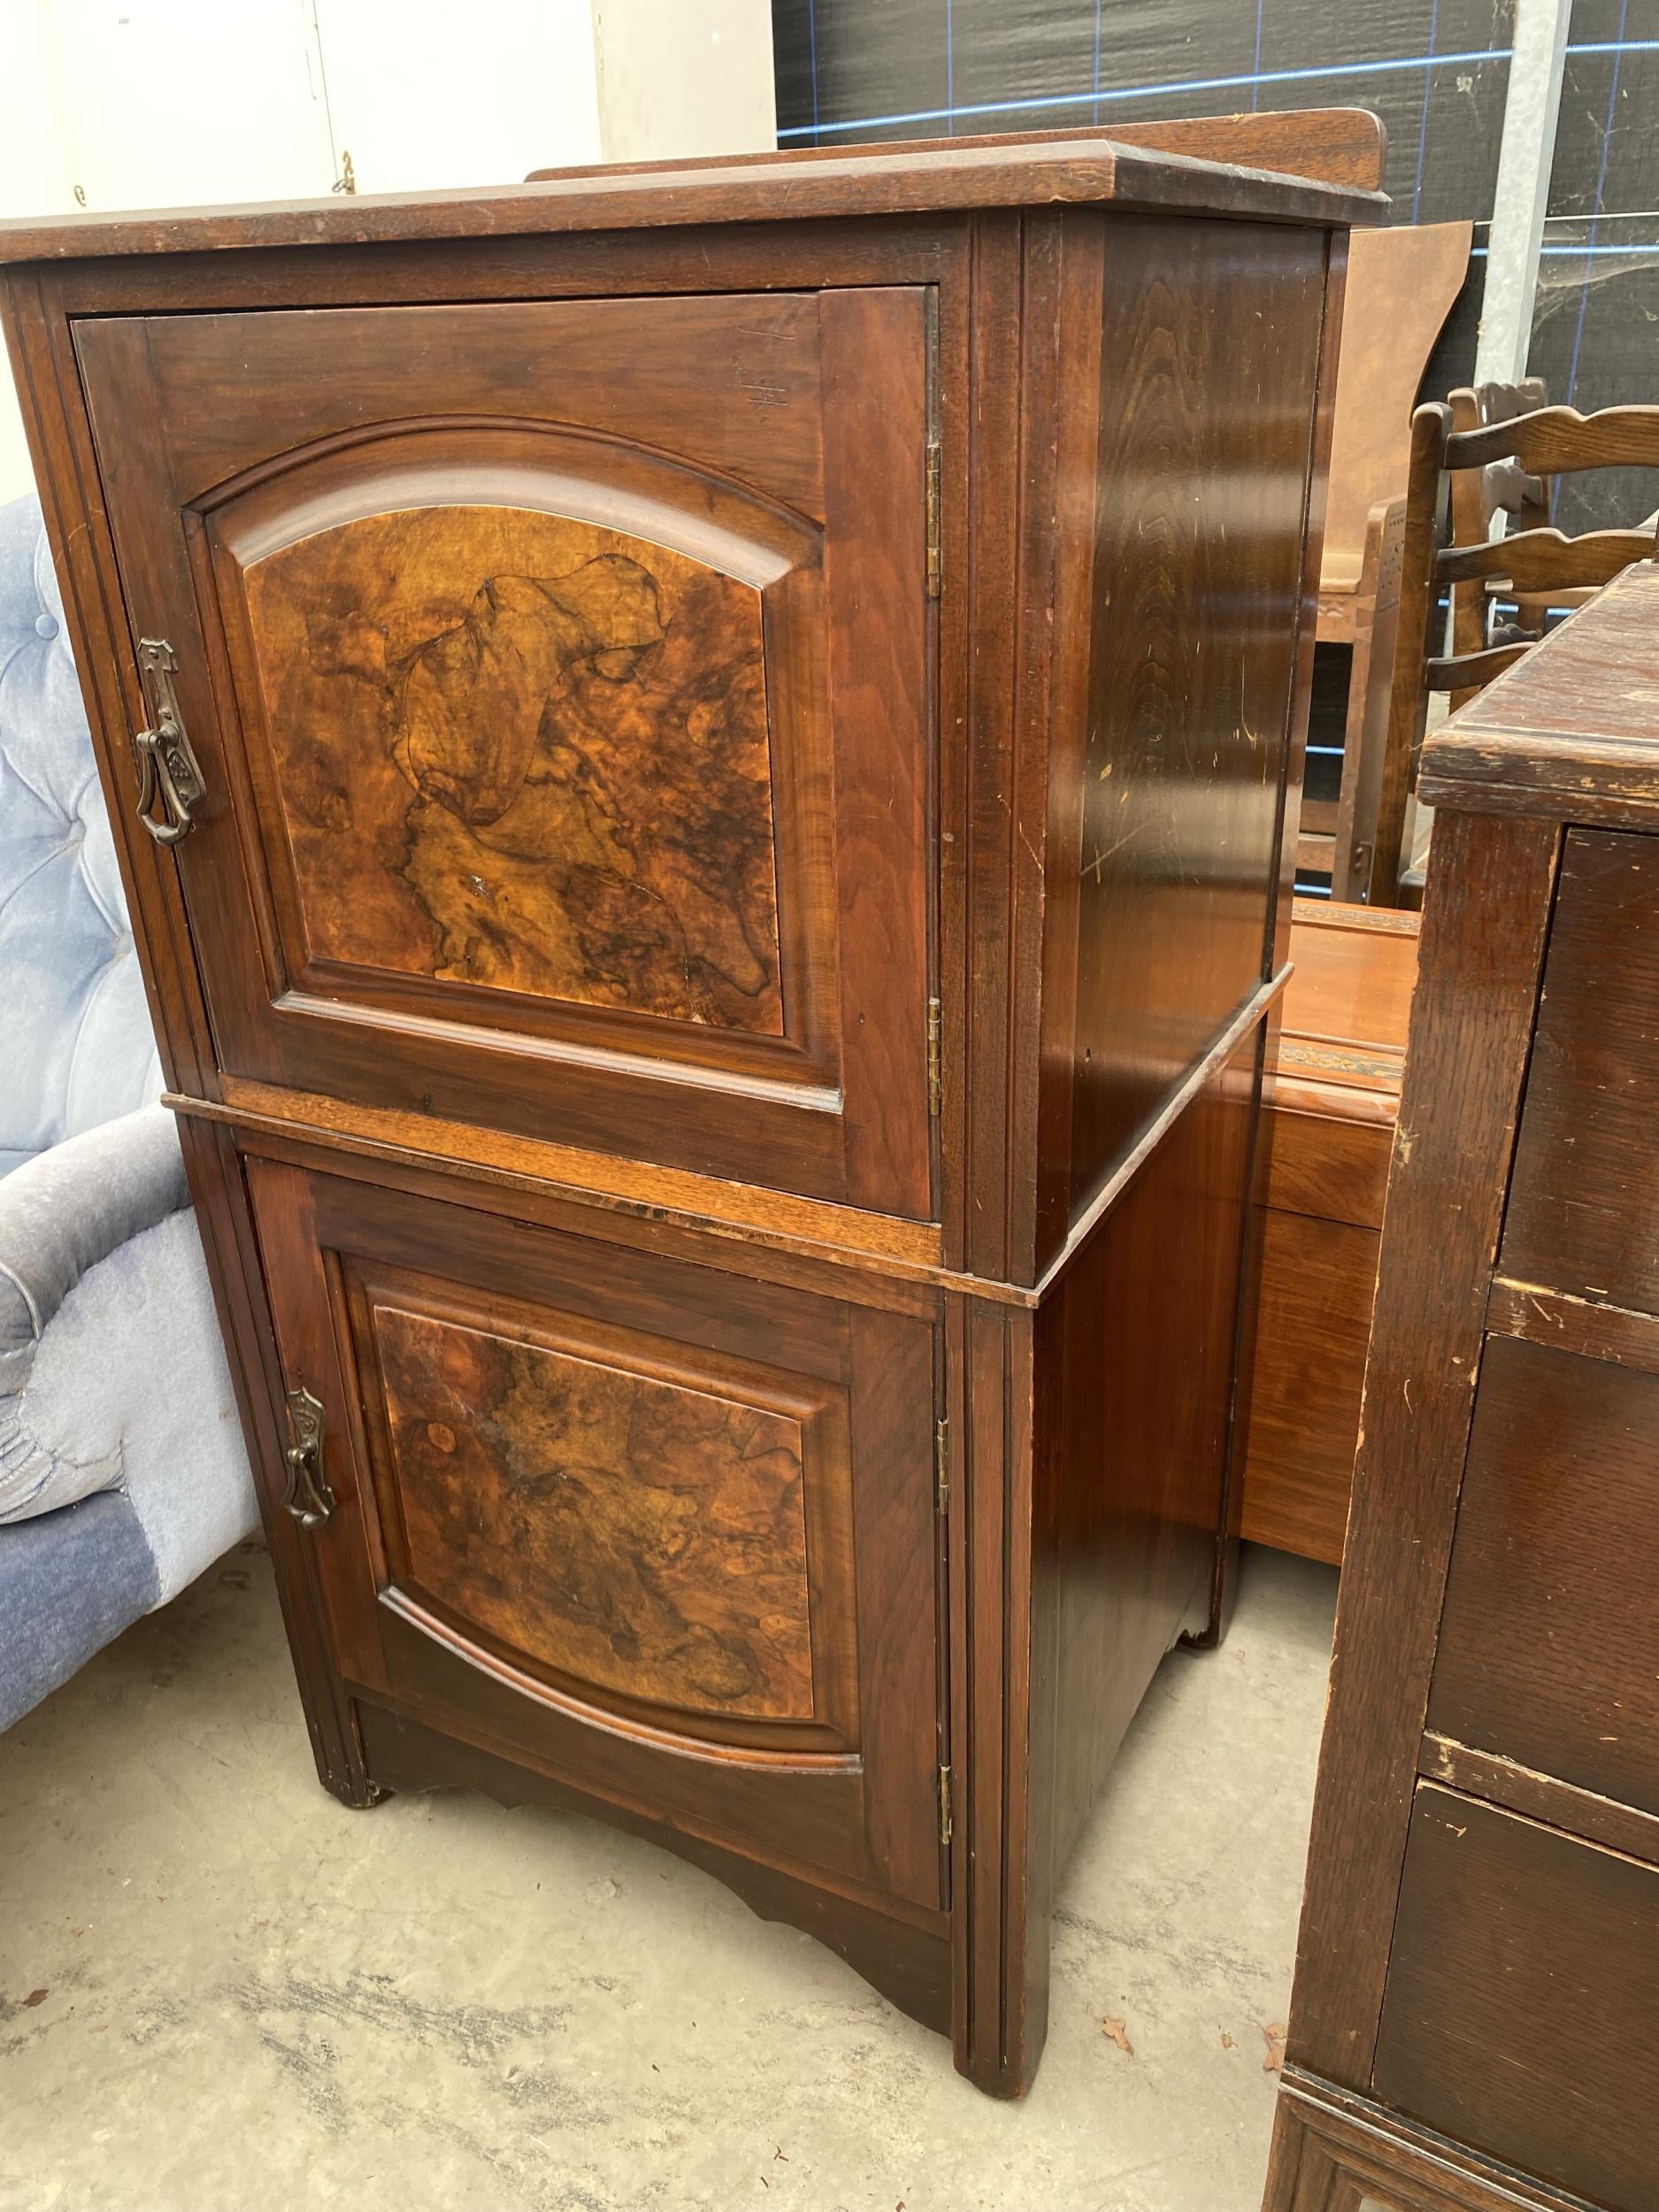 A LATE VICTORIAN TWO DOOR CUPBOARD, 23" WIDE - Image 2 of 3